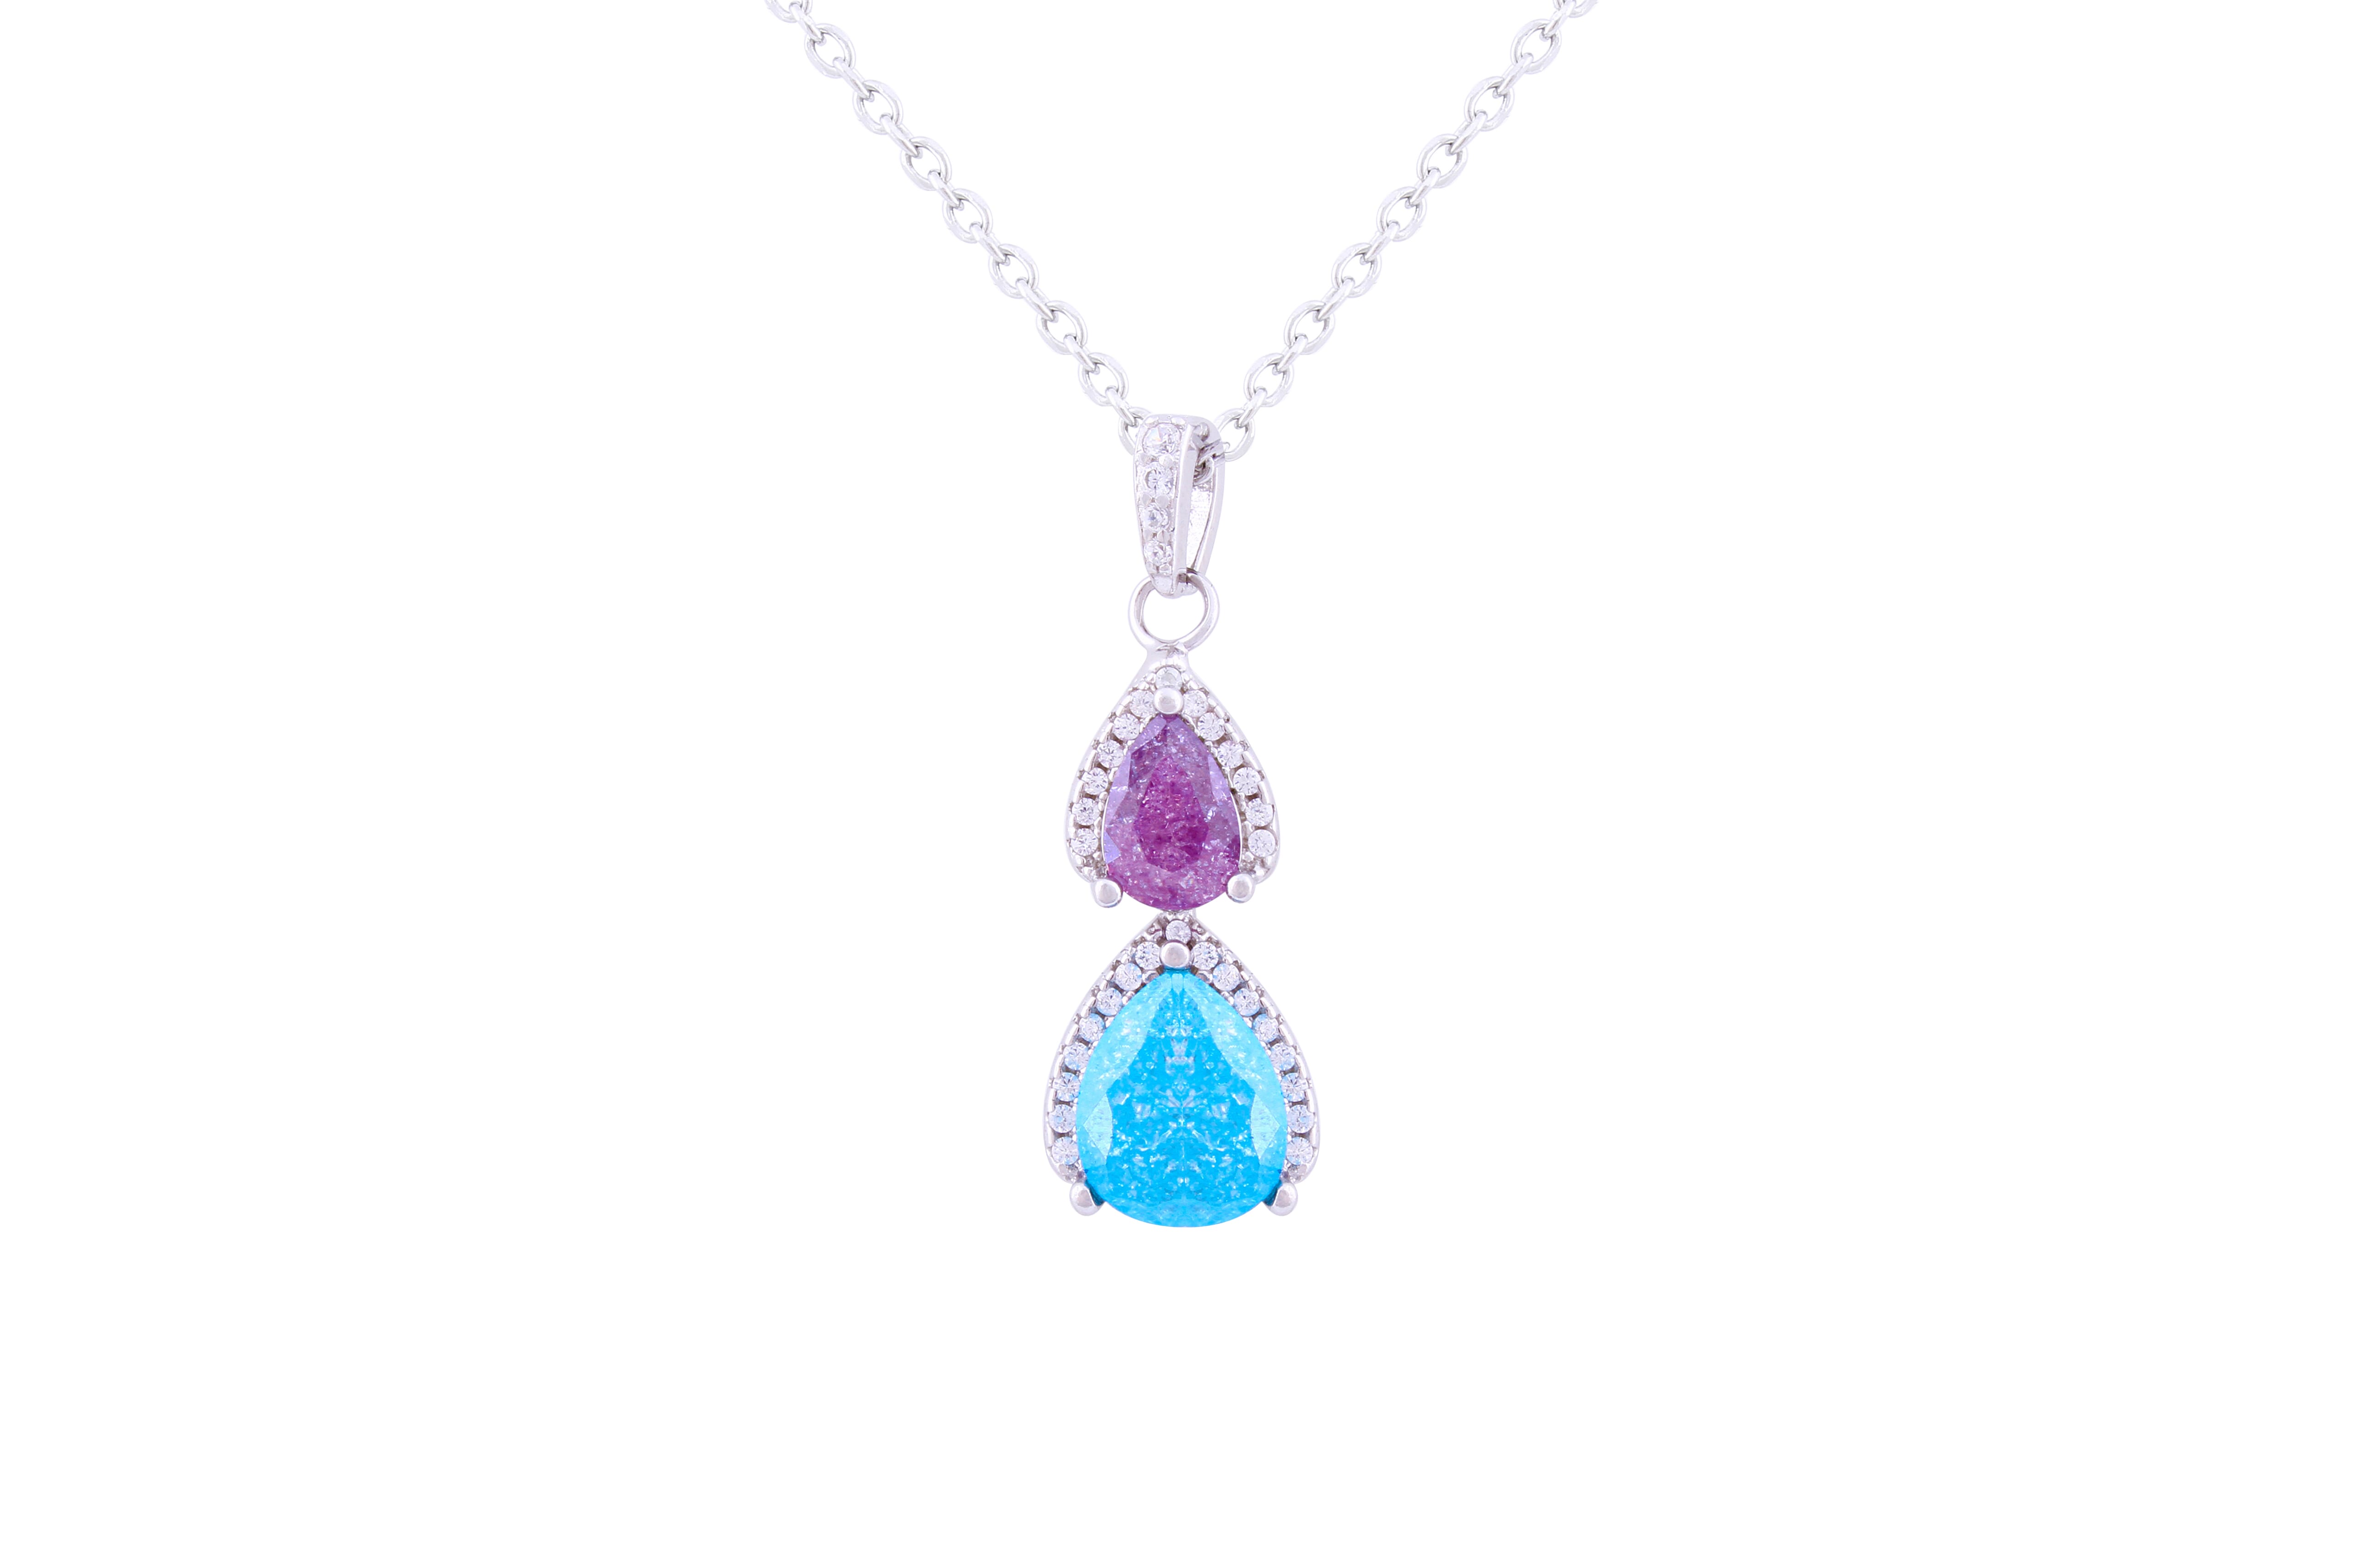 Asfour 925 Sterling Silver Necklace With Tenzanite & Aquamarine Pear Pendant NR0499-BN-A